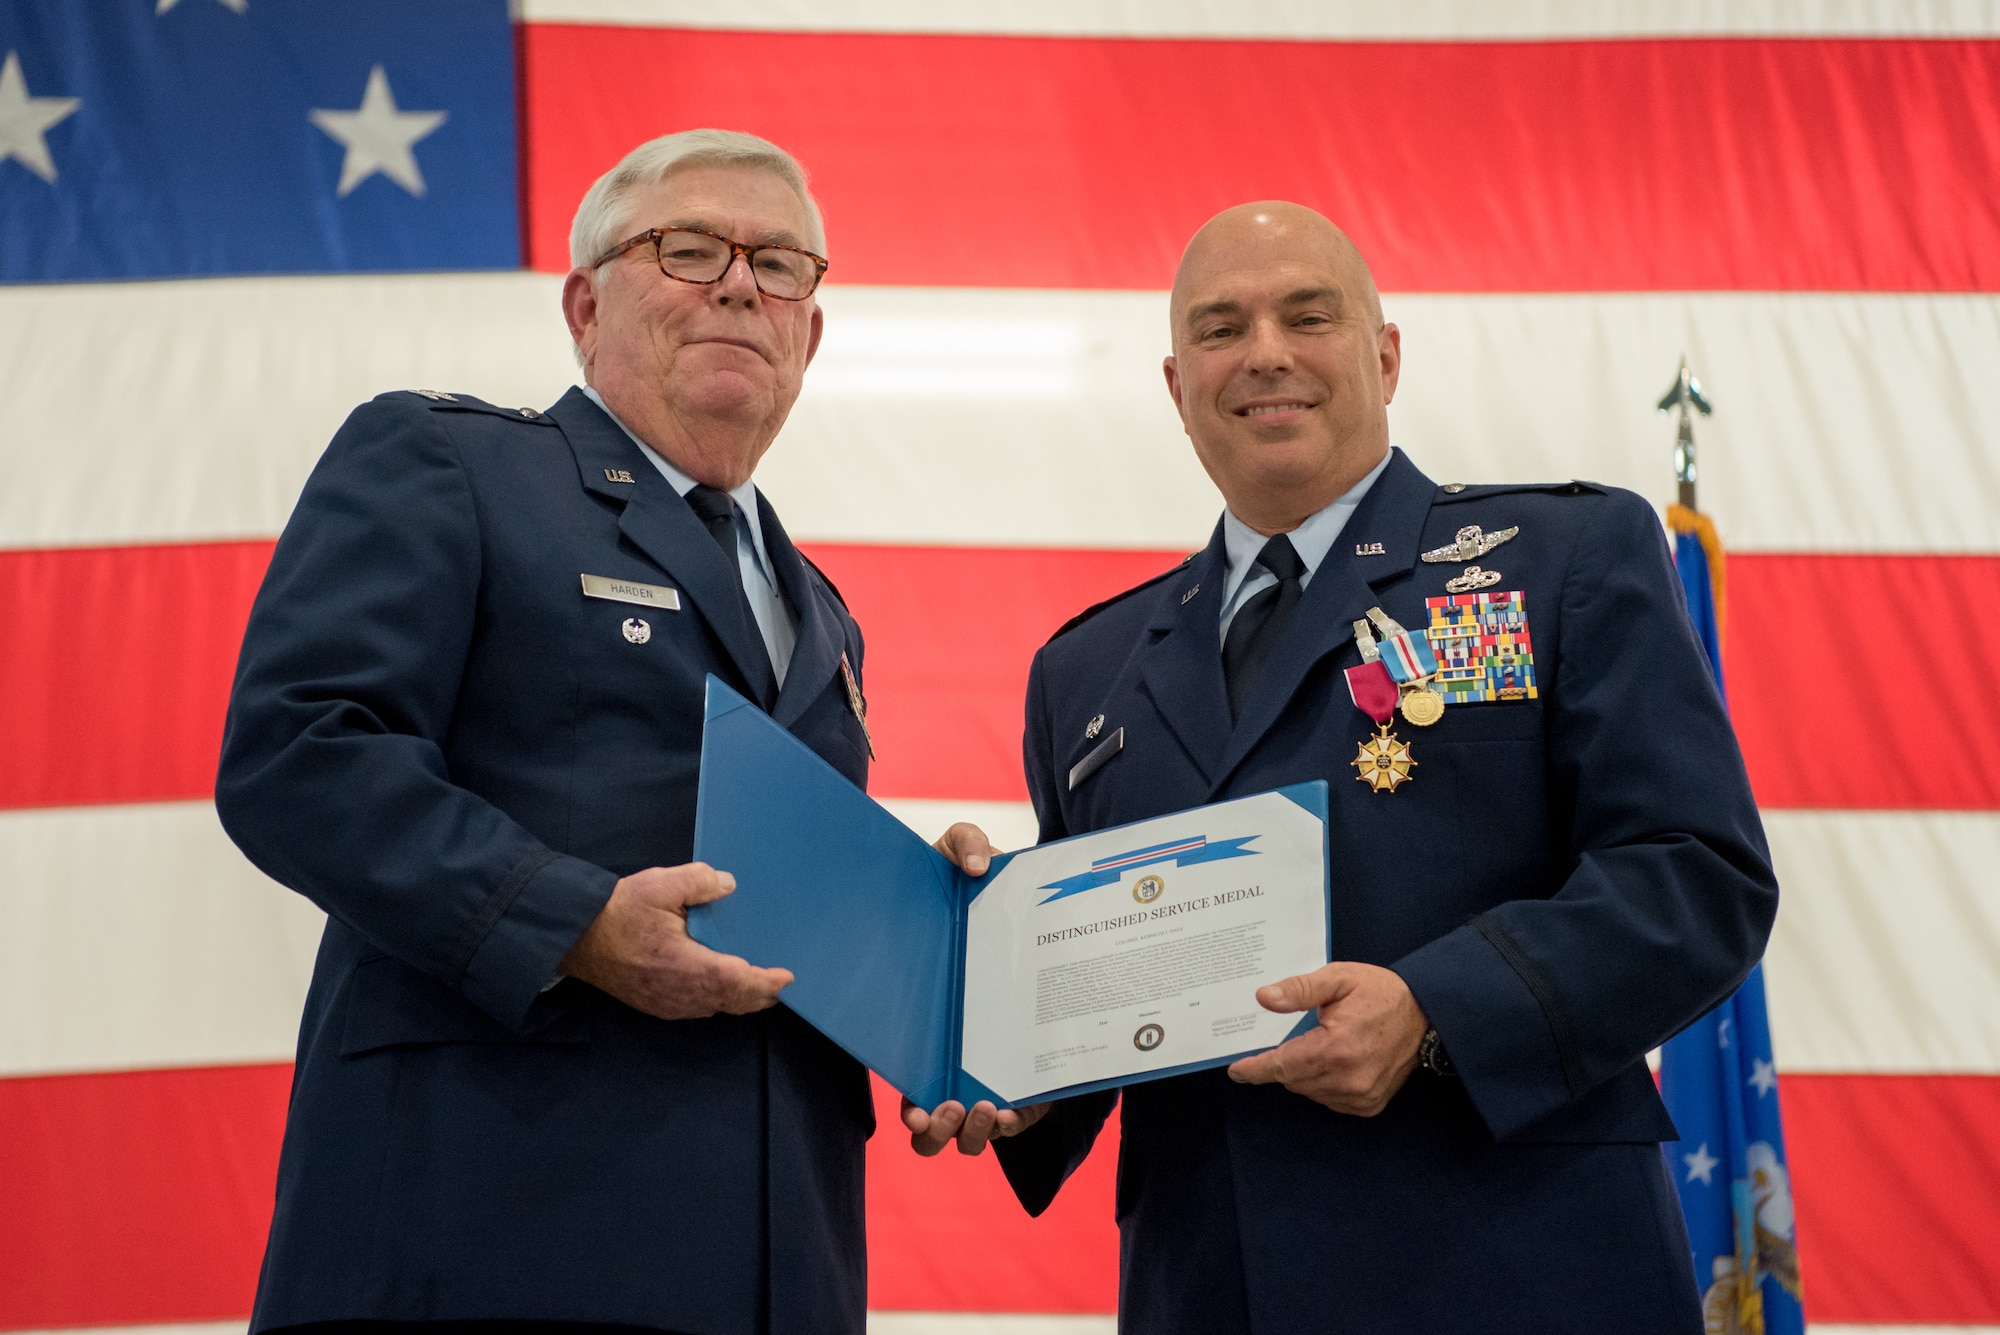 Col. Ken Dale (right), outgoing commander of the 123rd Maintenance Group, receives the Distinguished Service Medal from retired Col. Michael Harden, former commander of the 123rd Airlift Wing, during Dale’s retirement ceremony at the Kentucky Air National Guard Base in Louisville, Ky., on Dec. 1, 2018. Dale is retiring after more than 38 years of service to the Kentucky Air National Guard. (U.S. Air National Guard photo by Staff Sgt. Joshua Horton)